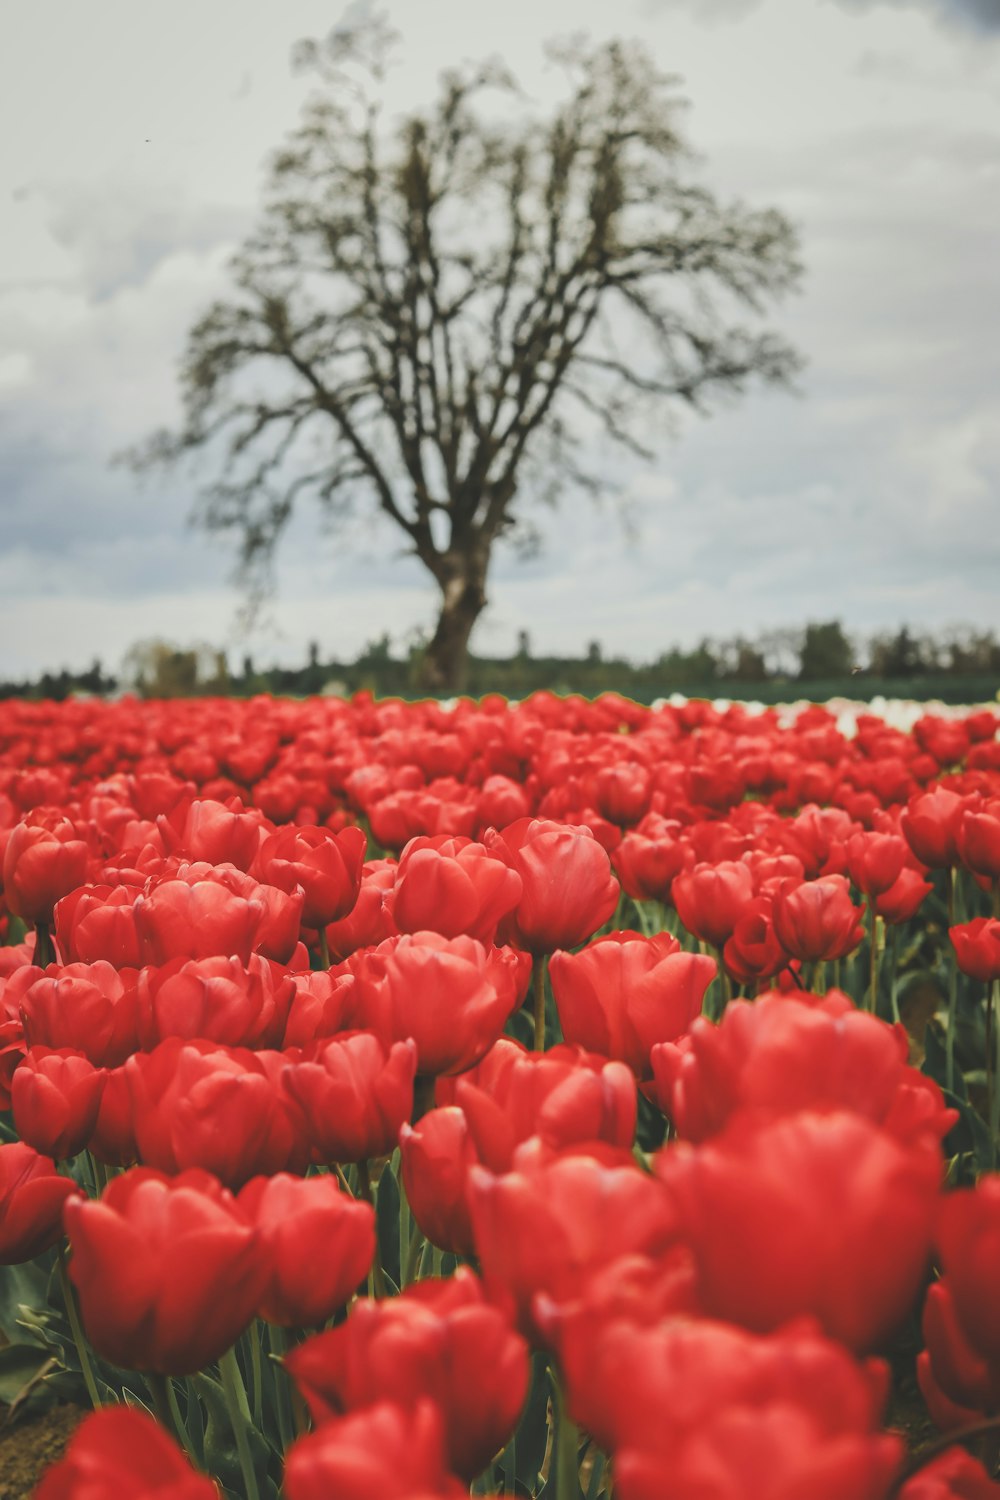 a field of red tulips with a tree in the background